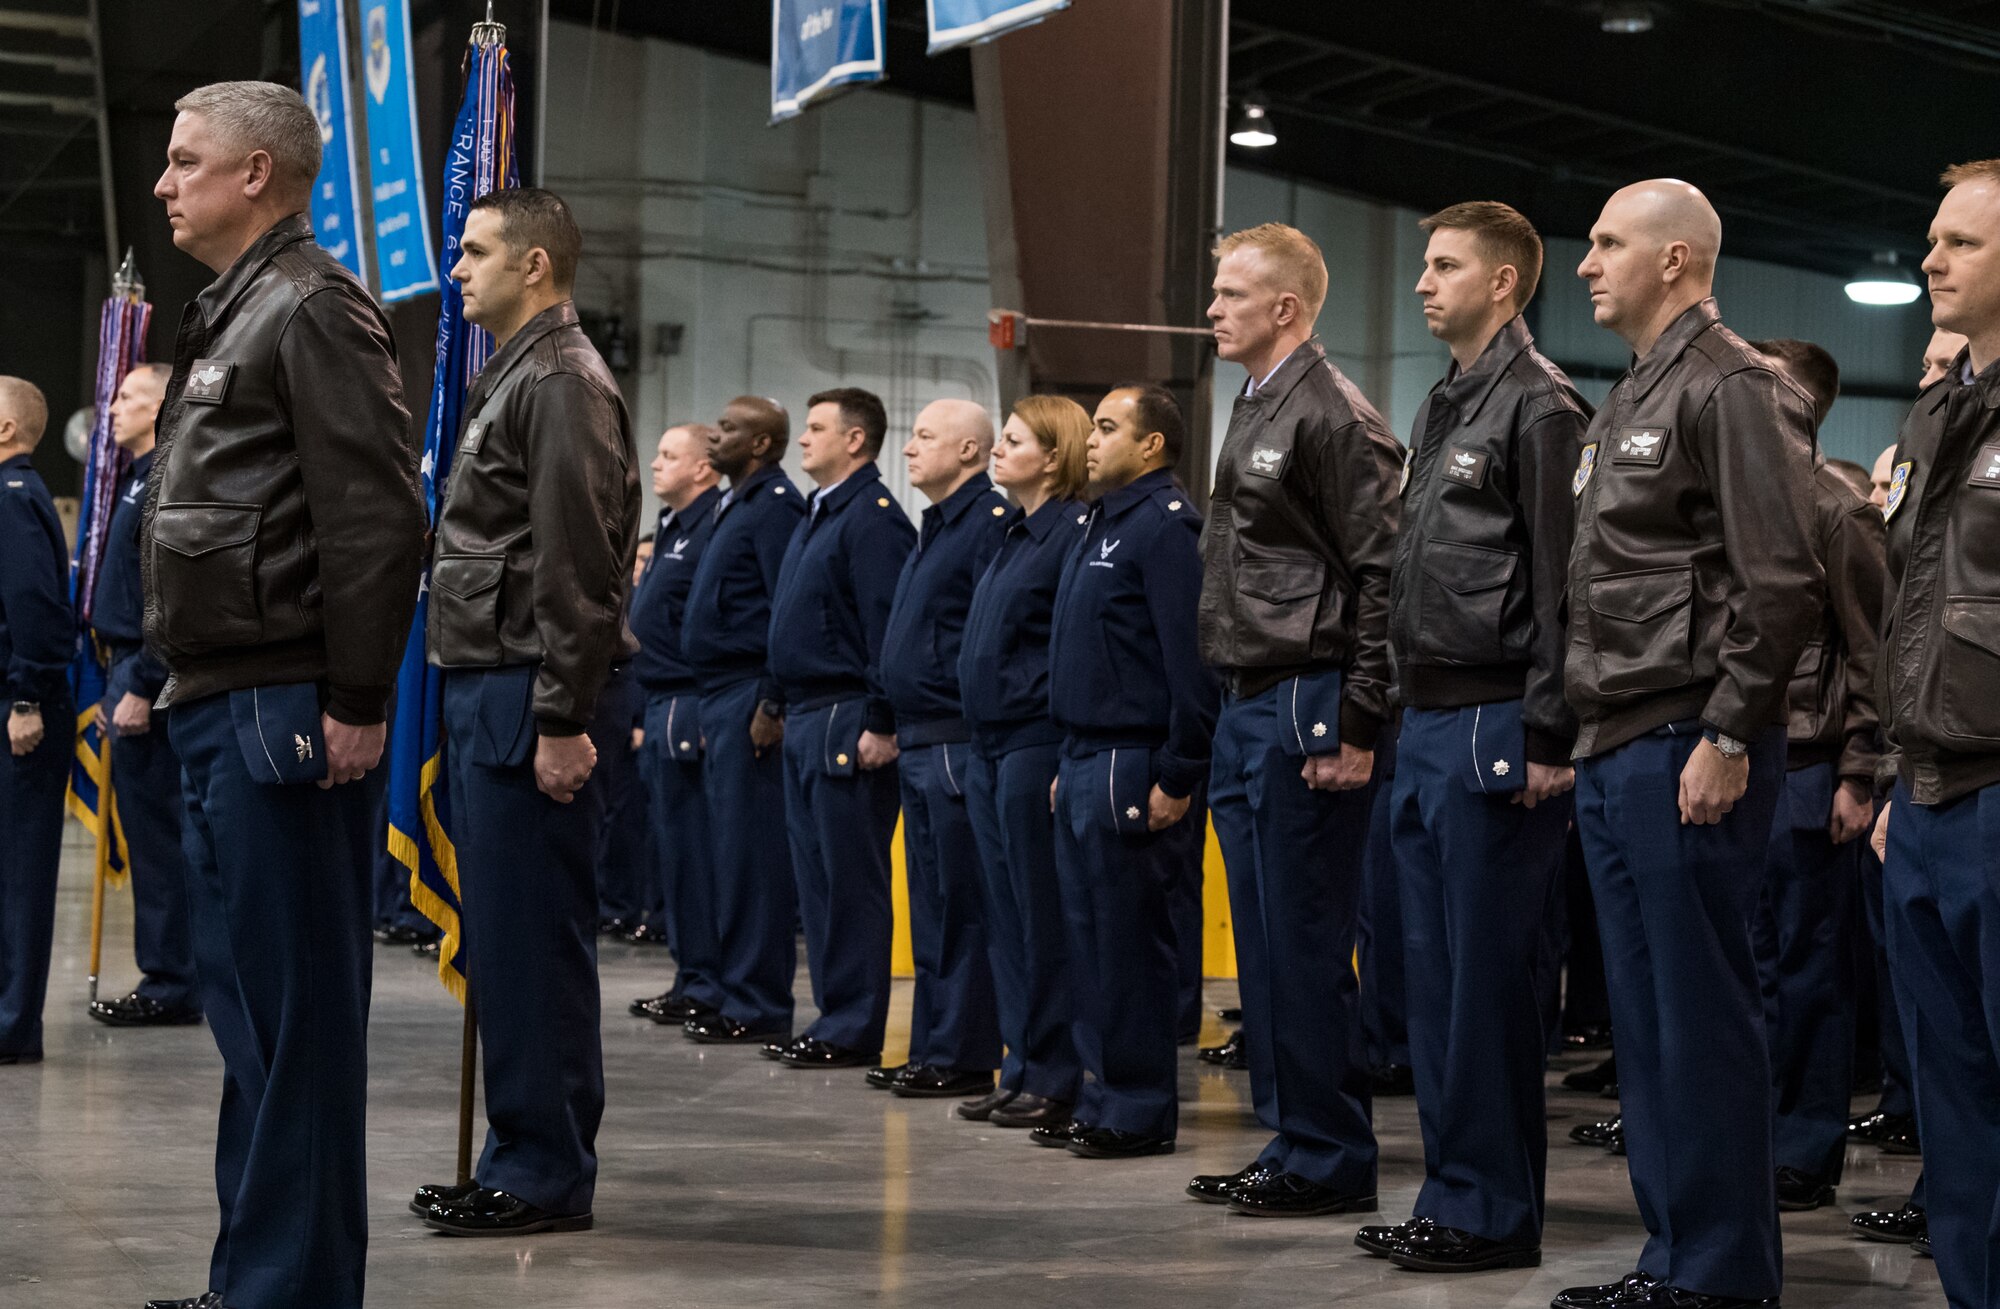 Team Dover members stand in formation during the 436th Airlift Wing Change of Command ceremony Jan. 7, 2020, inside the 436th Aerial Port Squadron on Dover Air Force Base, Del. During the ceremony, Col. Joel Safranek relinquished command to Col. Matthew Jones. (U.S. Air Force photo by Roland Balik)